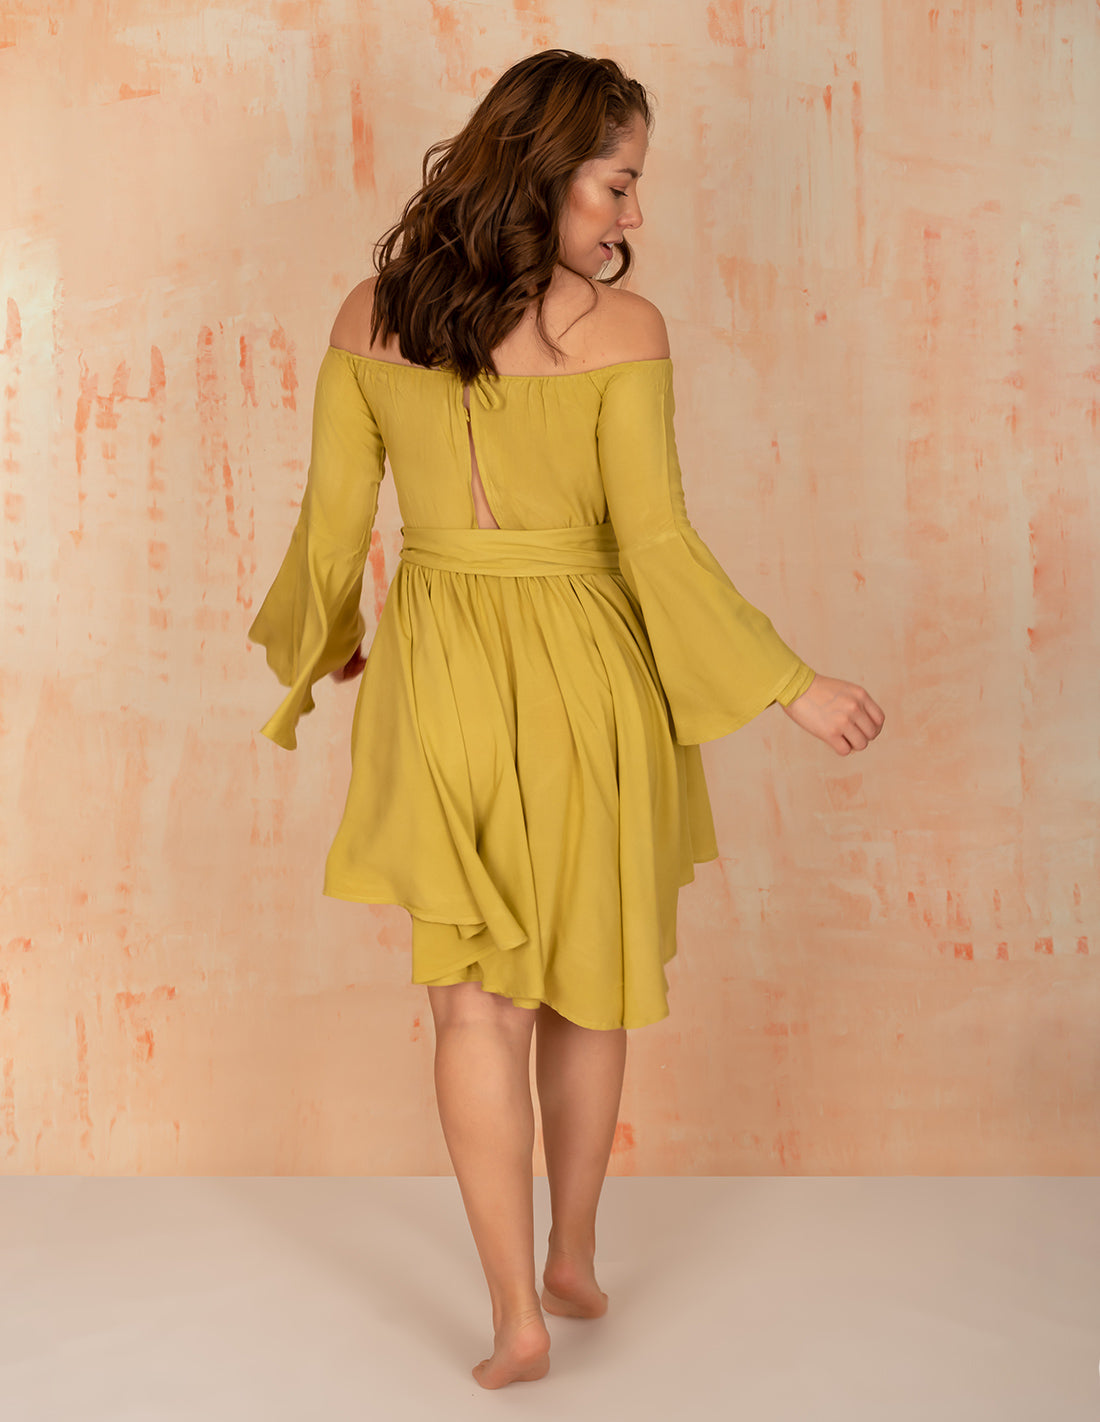 Butterfly Dress Mind Olive. Hand-Dyed Dress In Mind Olive. Entreaguas